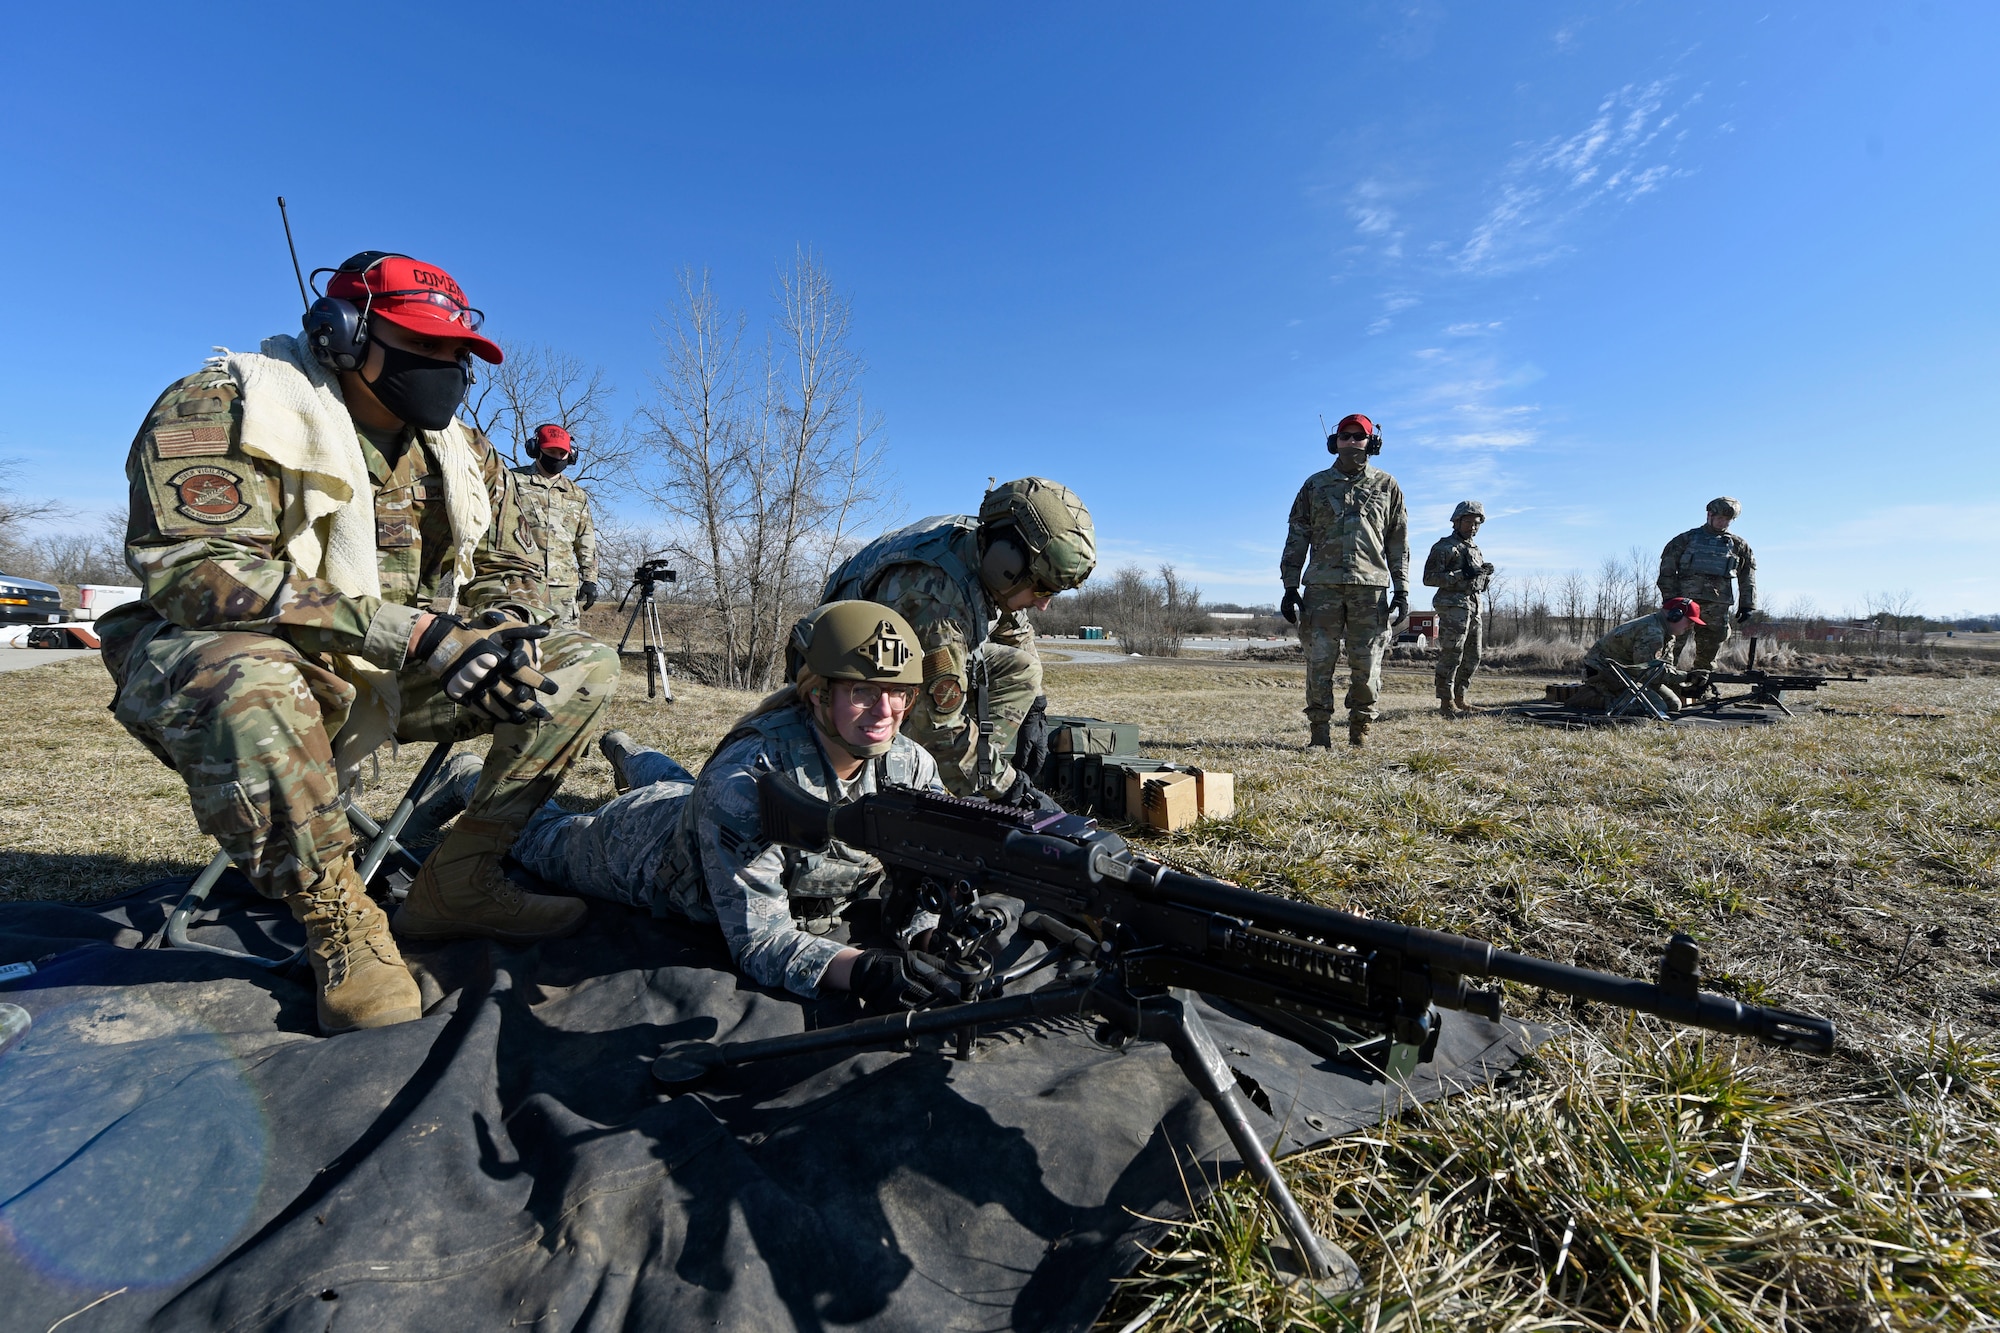 Air Force combat arms instructors with the 88th Security Forces Squadron watch as Airmen prepare to fire an M240B machine gun at Camp Atterbury in Edinburgh, Indiana, on Feb. 25, 2021. The combat arms instructors, from Wright-Patterson Air Force Base, Ohio, travel to Camp Atterbury multiple times each year for readiness and qualification training with deployers on machine guns and grenade launchers. (U.S. Air Force photo by Ty Greenlees)